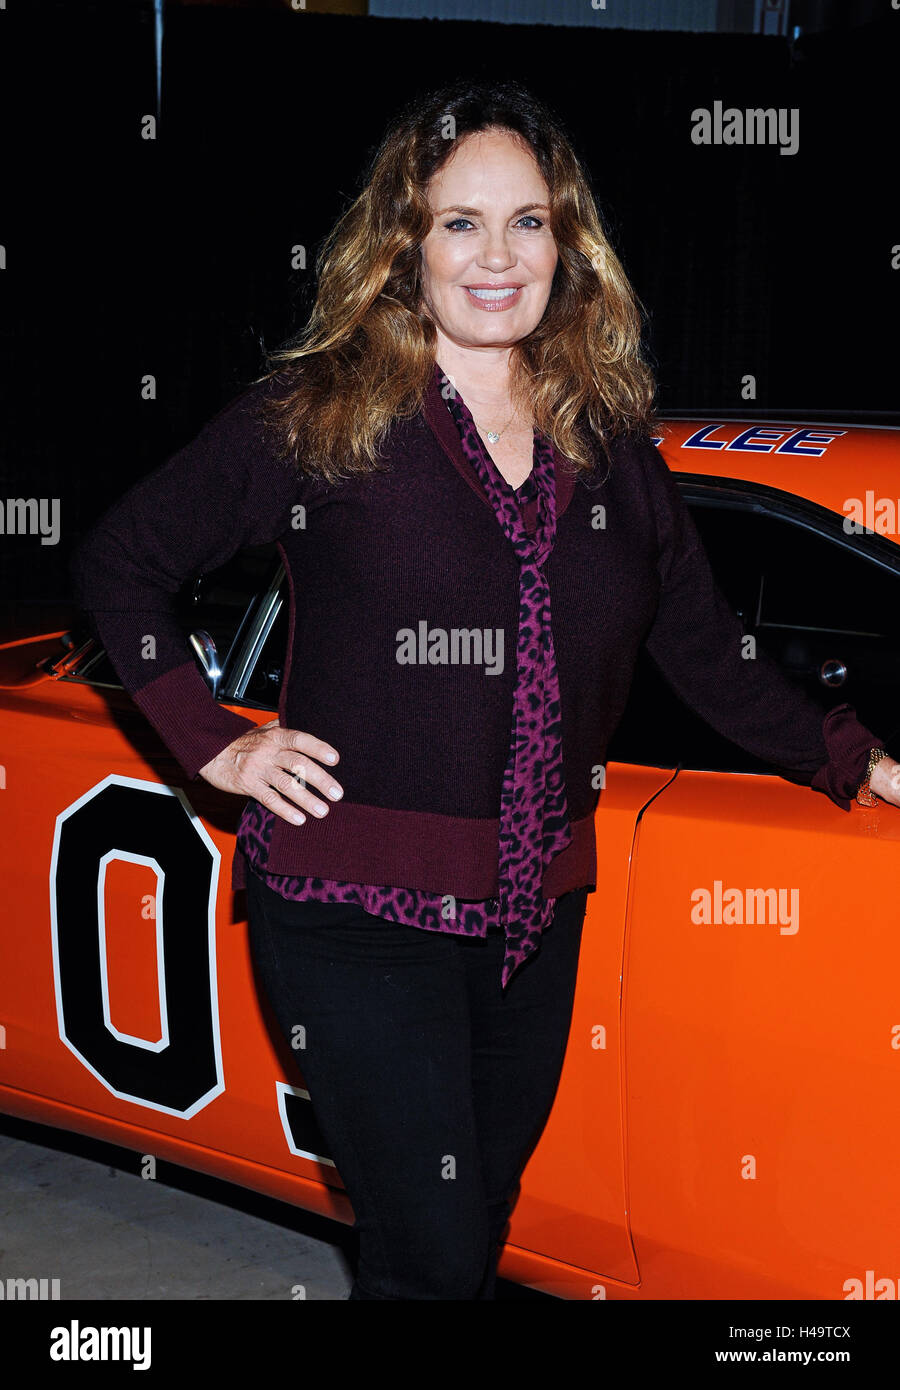 Hamilton, ON, Canada. 1st Oct, 2016. 01 October 2016 - Hamilton, Ontario, Canada. Actress Catherine Bach (best known for her role as Daisy Duke on the TV series ''Dukes of Hazzard'') at Hamilton Comic Con at the Canadian Warplane Heritage Museum. Photo Credit: Brent Perniac/AdMedia © Brent Perniac/AdMedia/ZUMA Wire/Alamy Live News Stock Photo